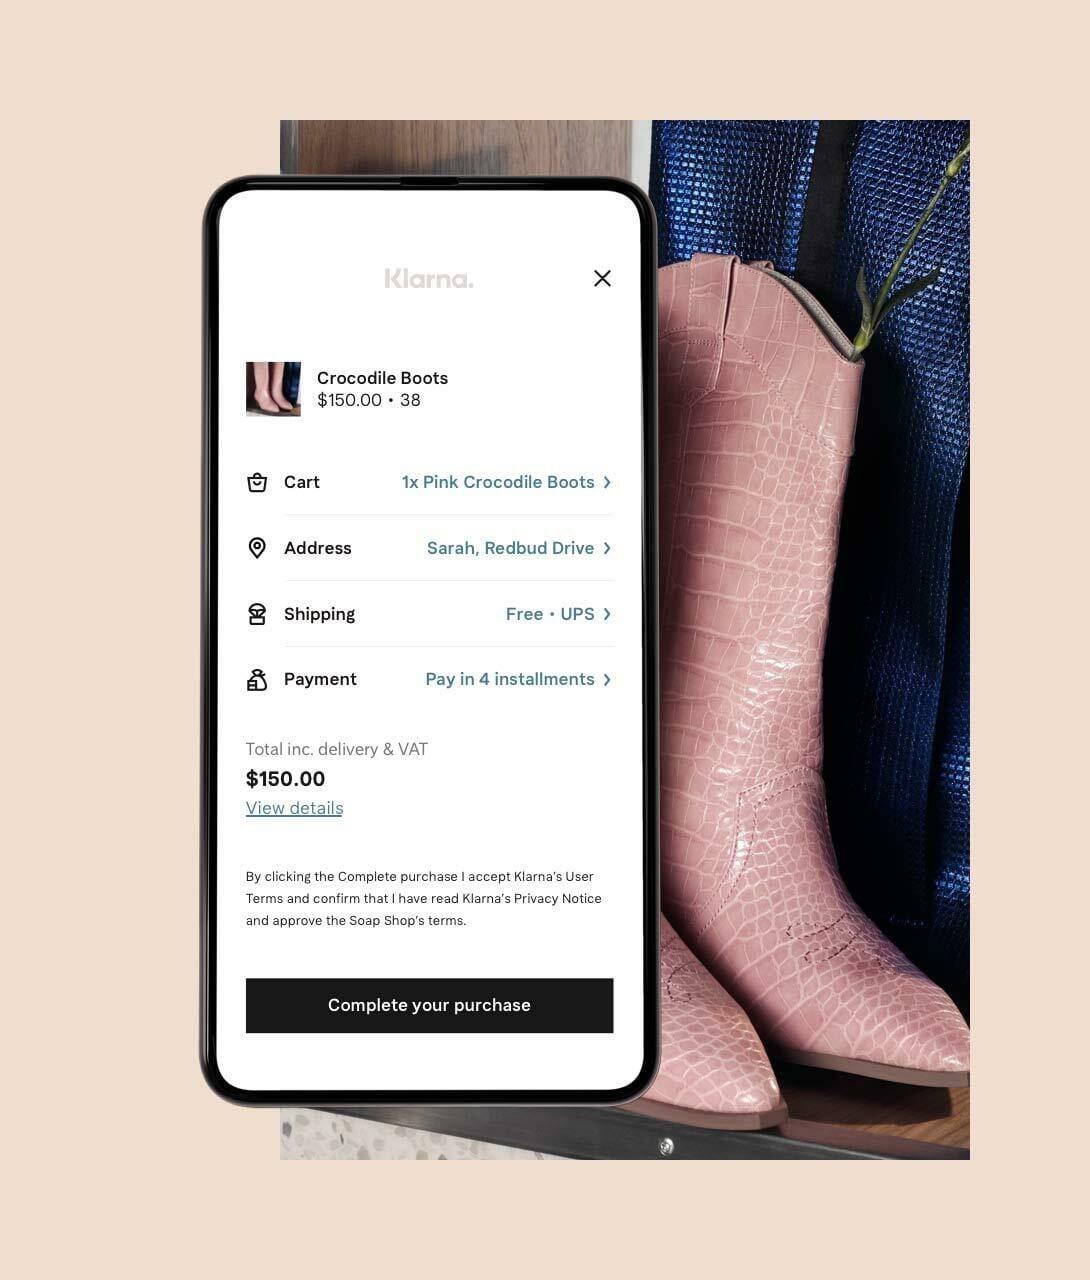 Klarna's Complete your purchase screen over cowboy boots